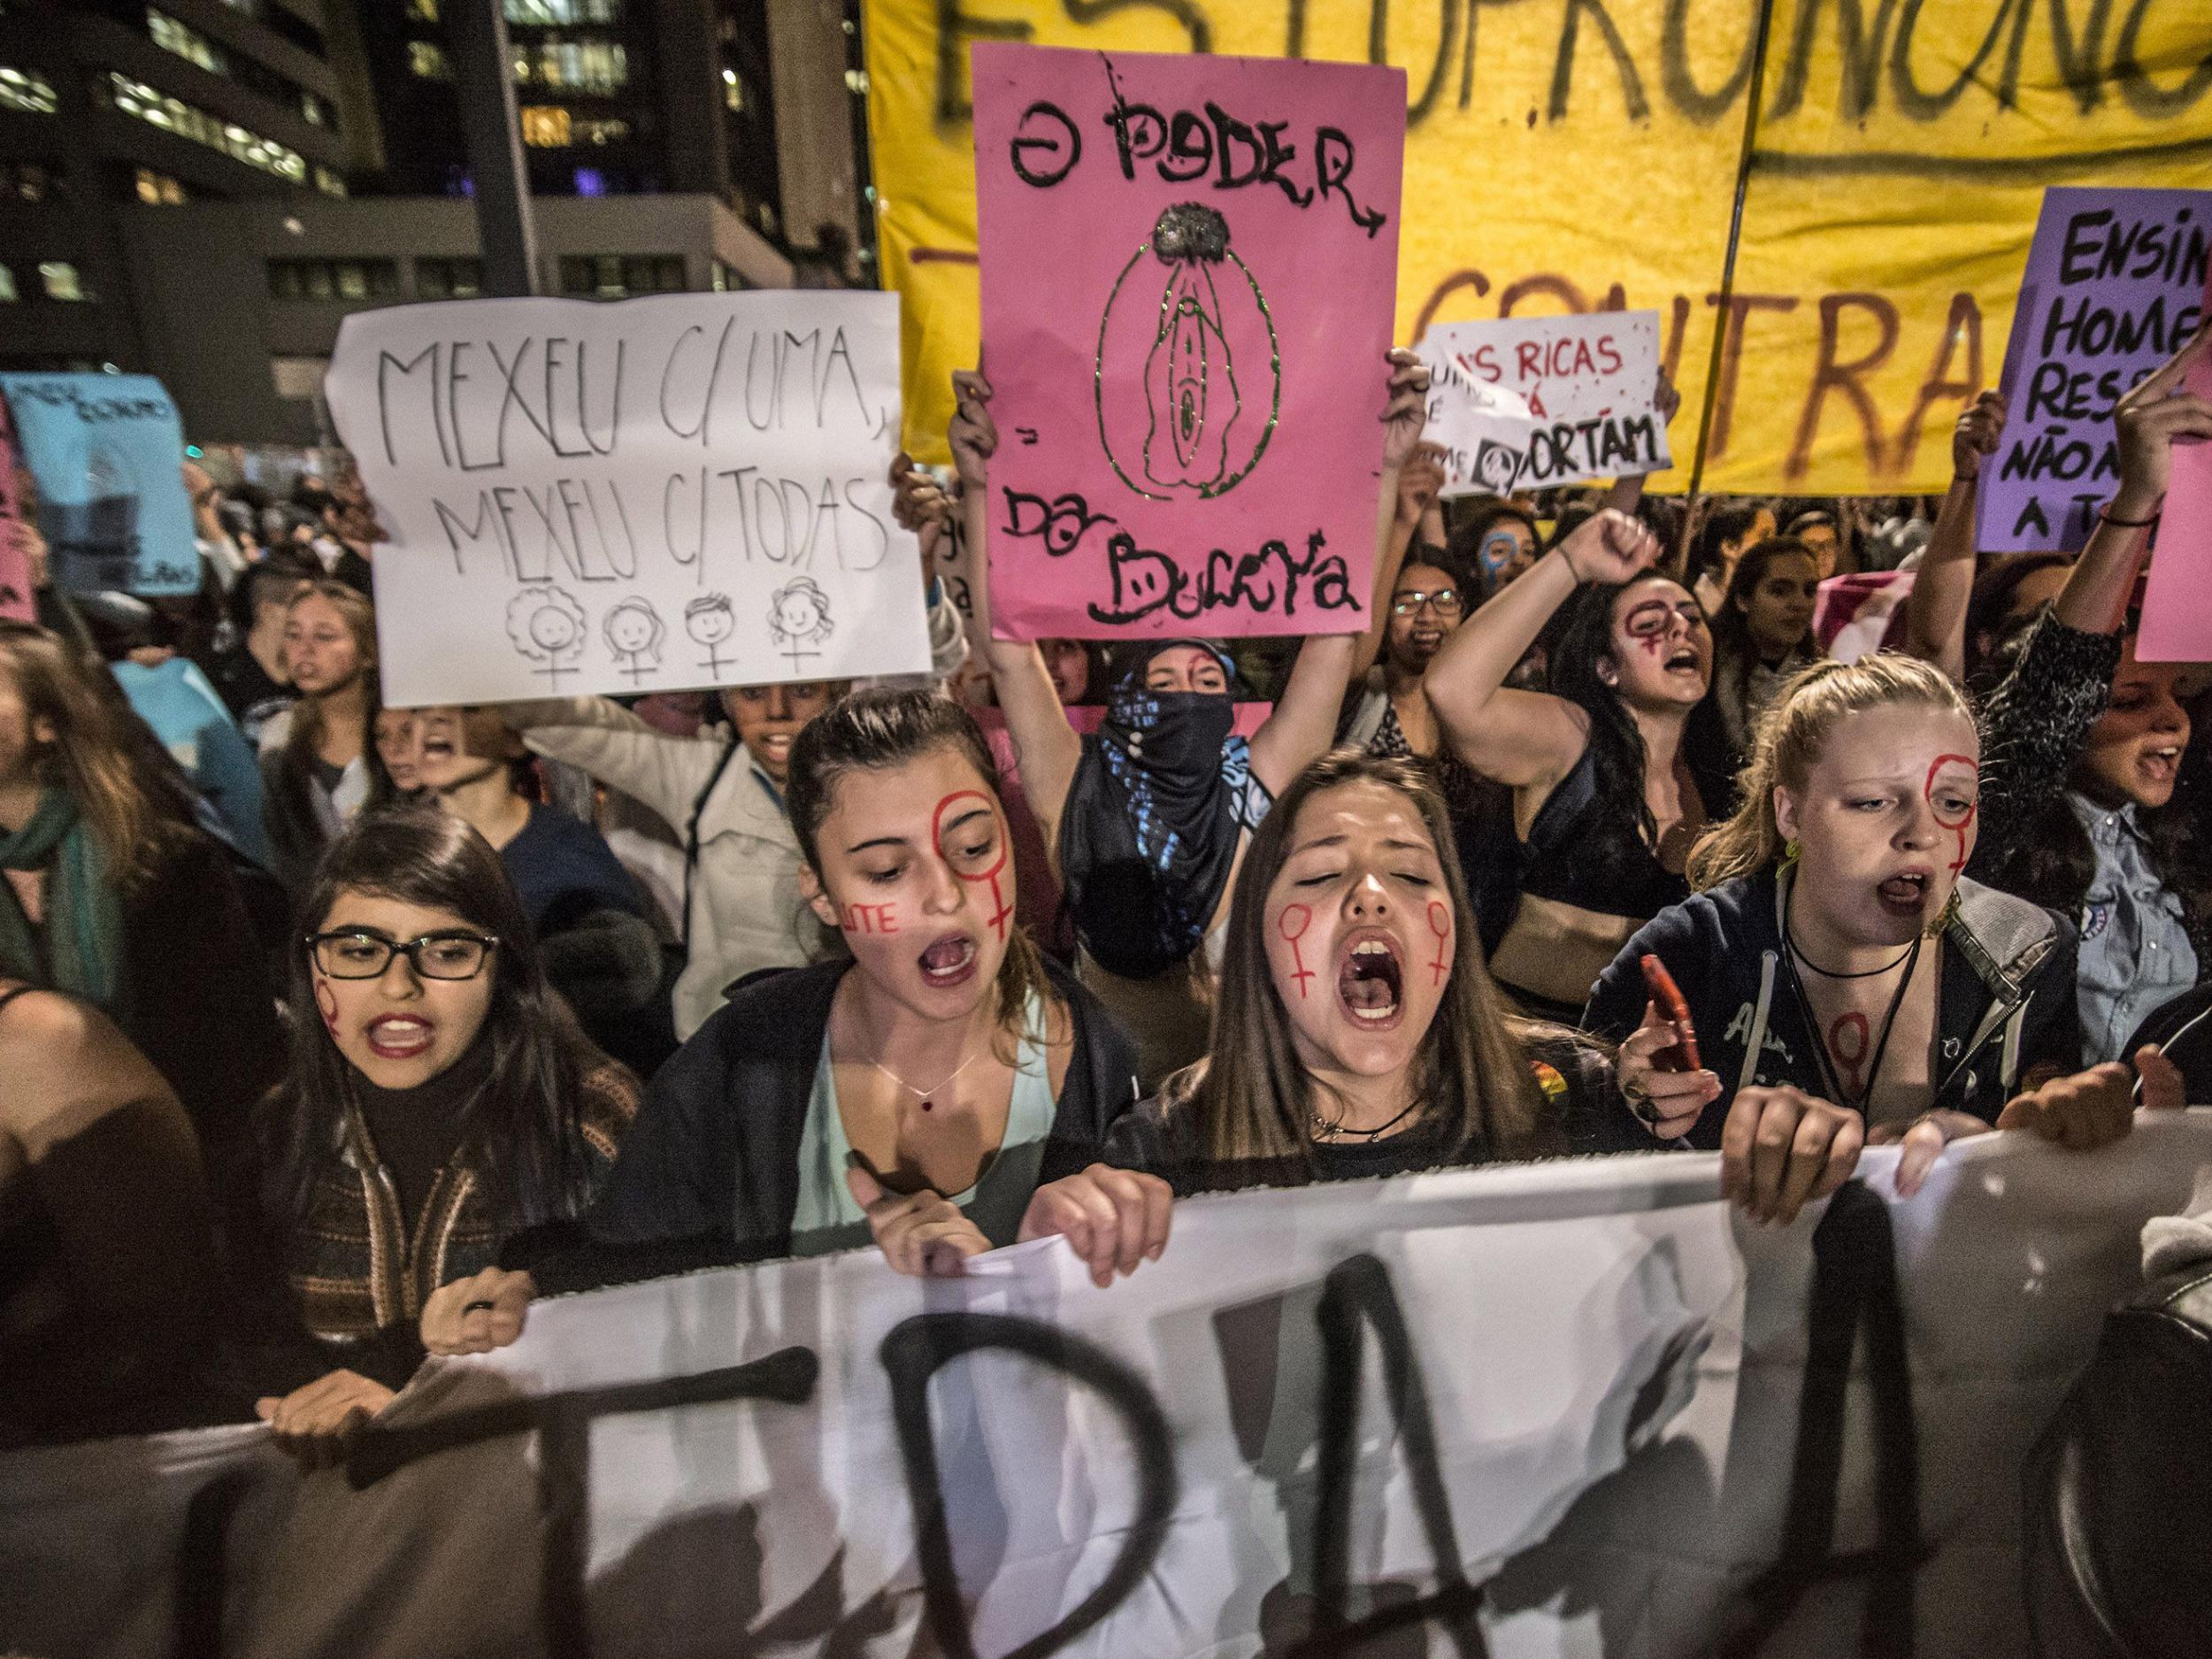 Women in Sao Paulo, Brazil march during a protest following the gang rape of a 16-year-old girl